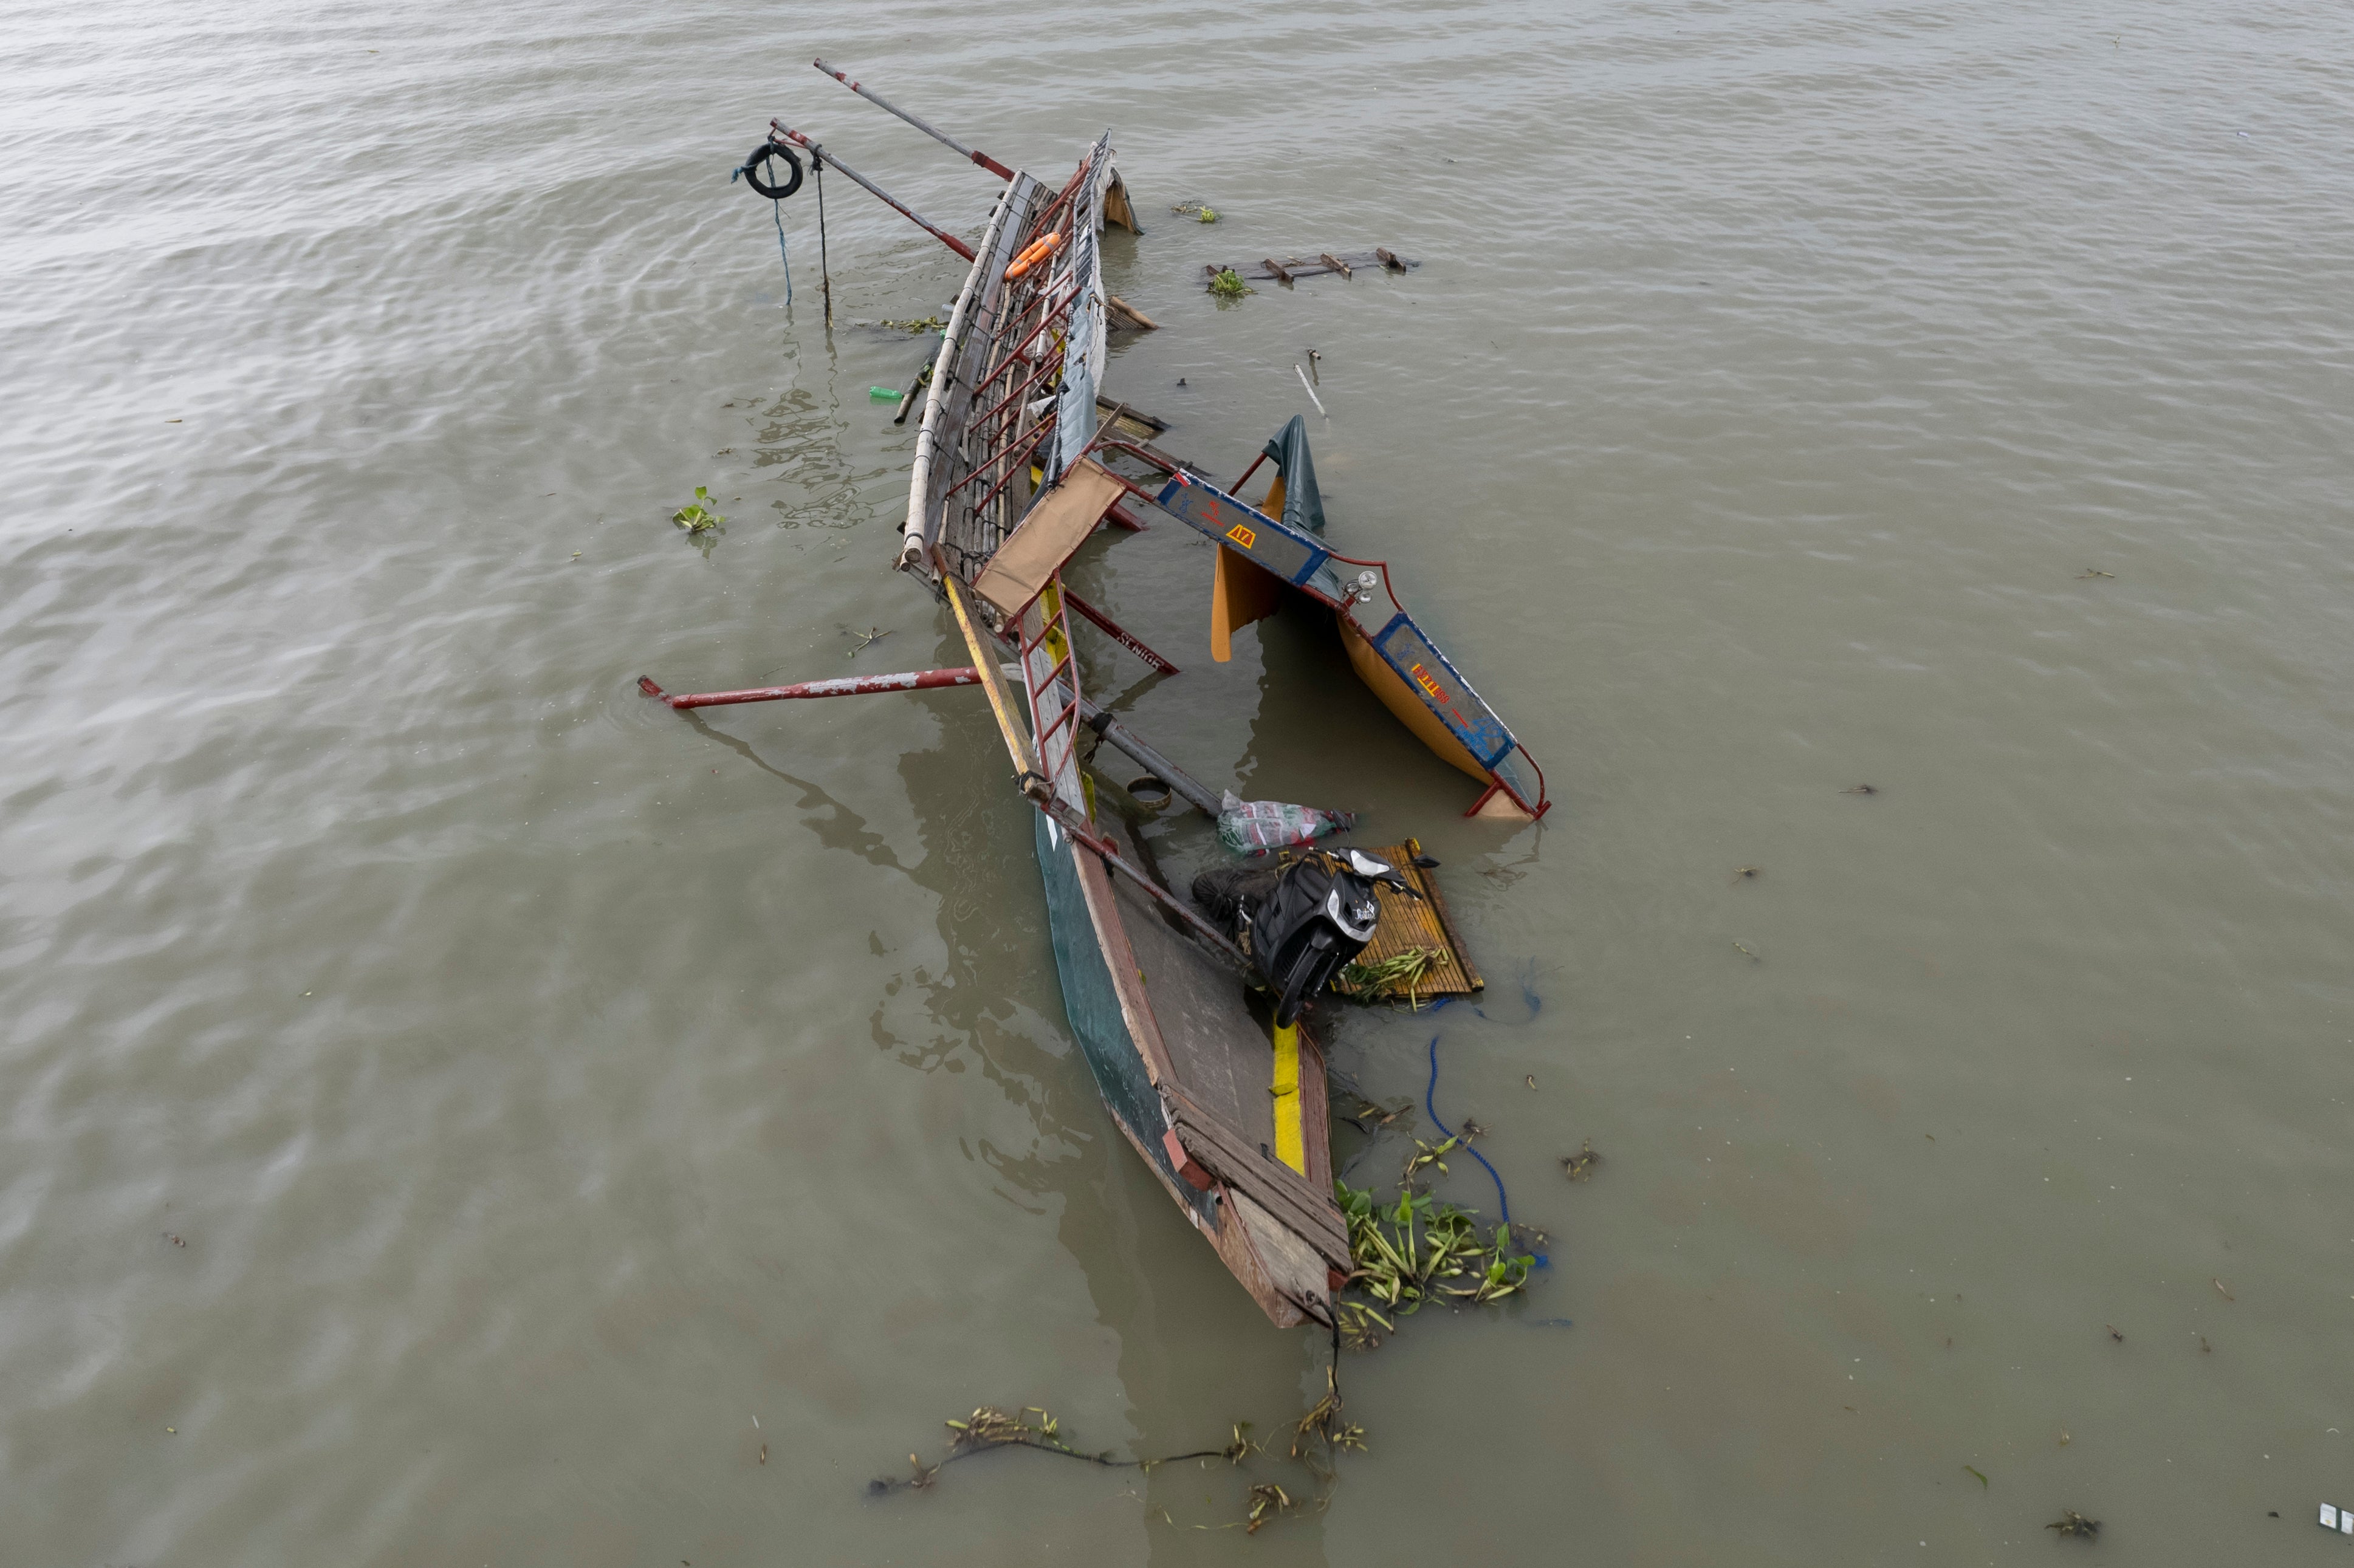 This photo taken by drone shows the remains of a passenger boat that capsized in Binangonan, Rizal province, Philippines on Friday